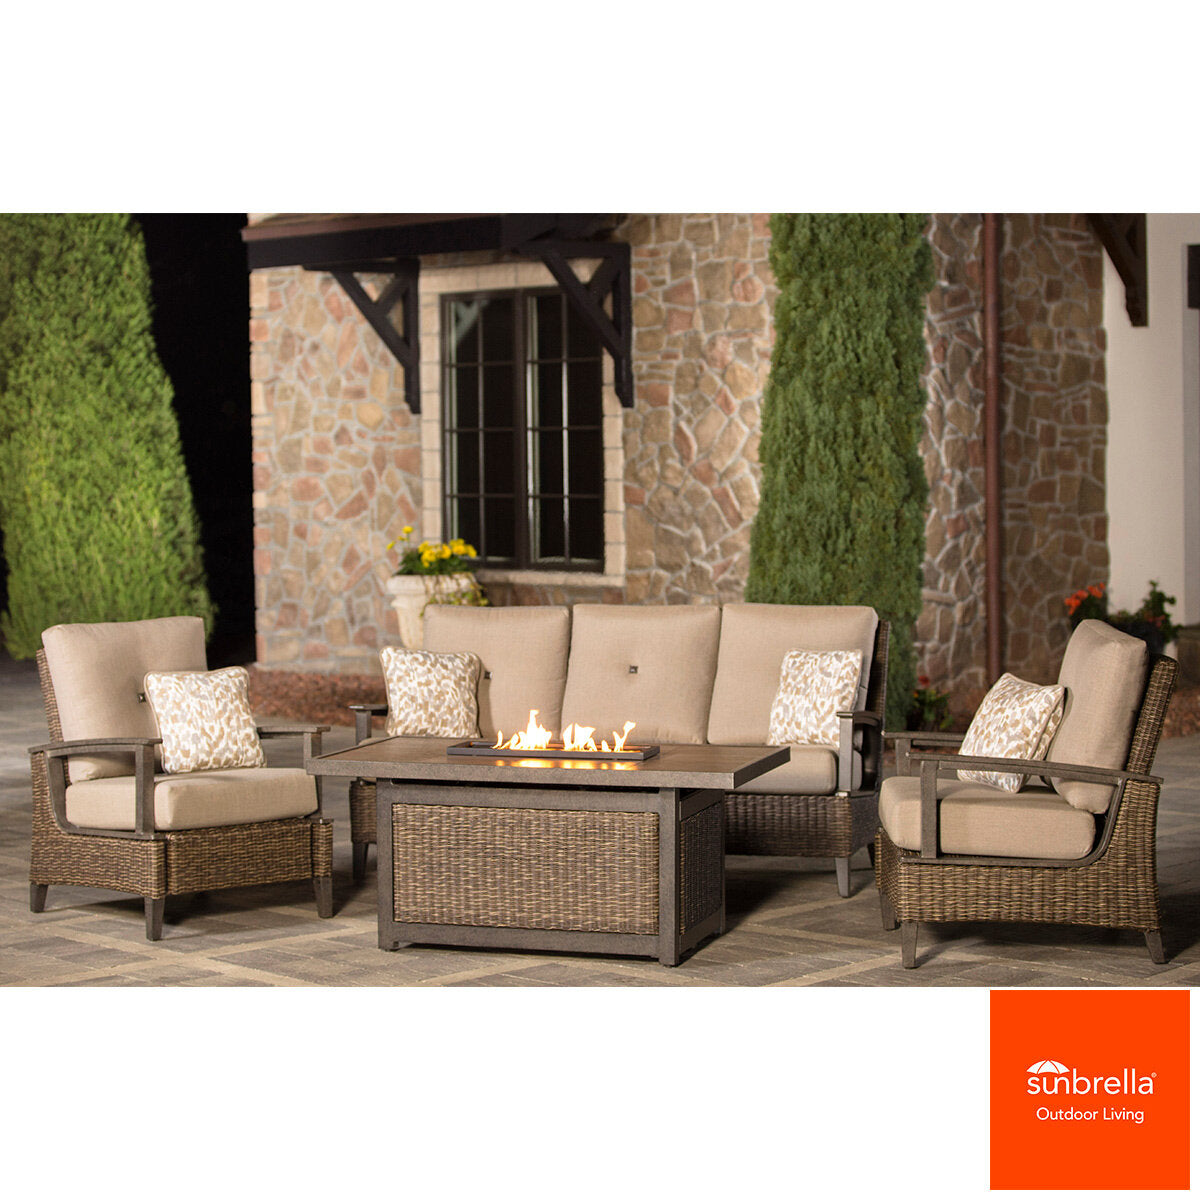 Agio Brentwood 4 Piece Woven Deep Seating Fire Set + Cover